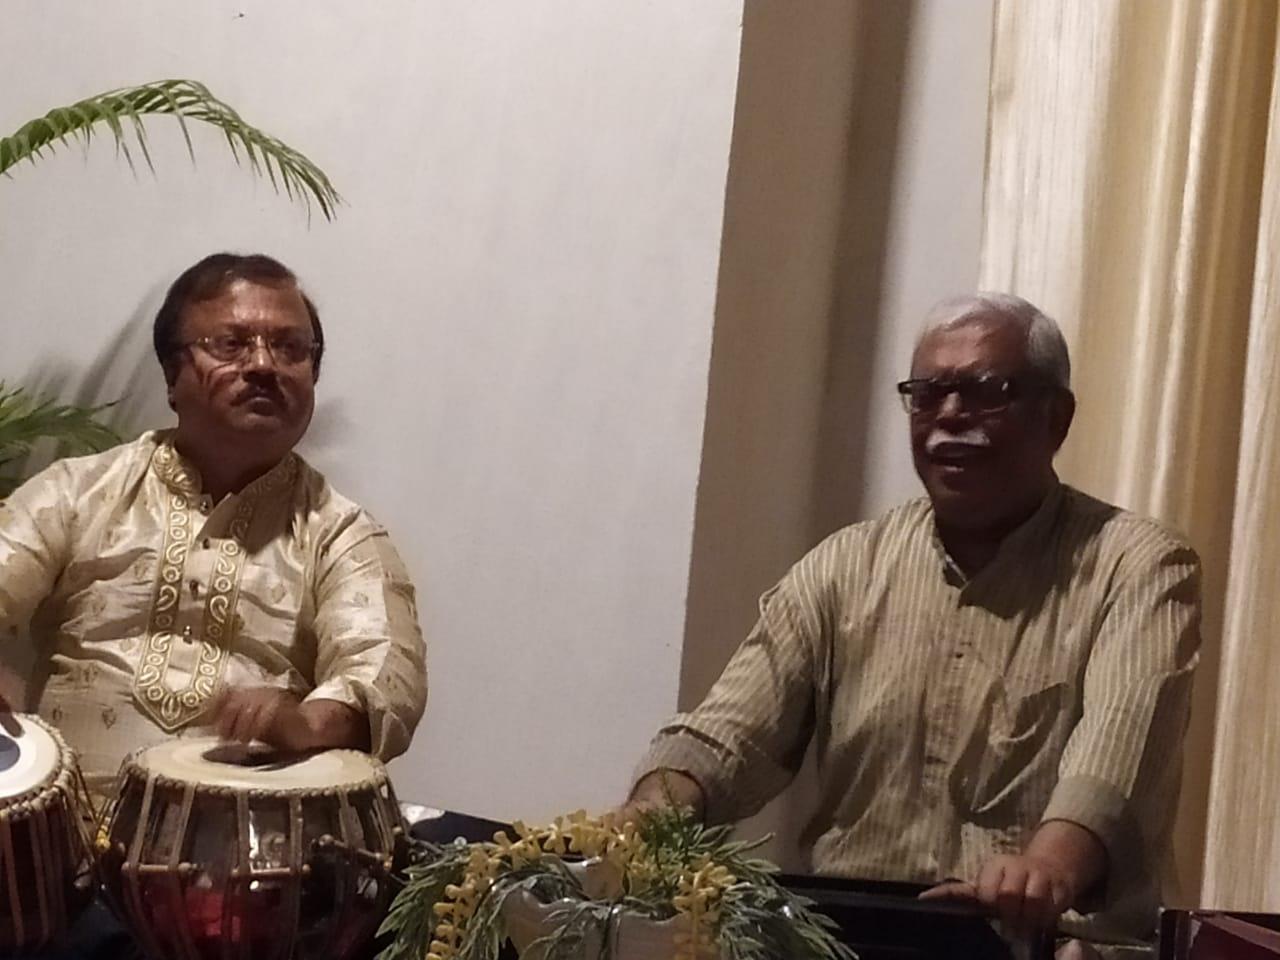 Former Vice-Chancellor, University of Calcutta, Eminent Economist Professor Sugat Marjit performing classical music in our college.